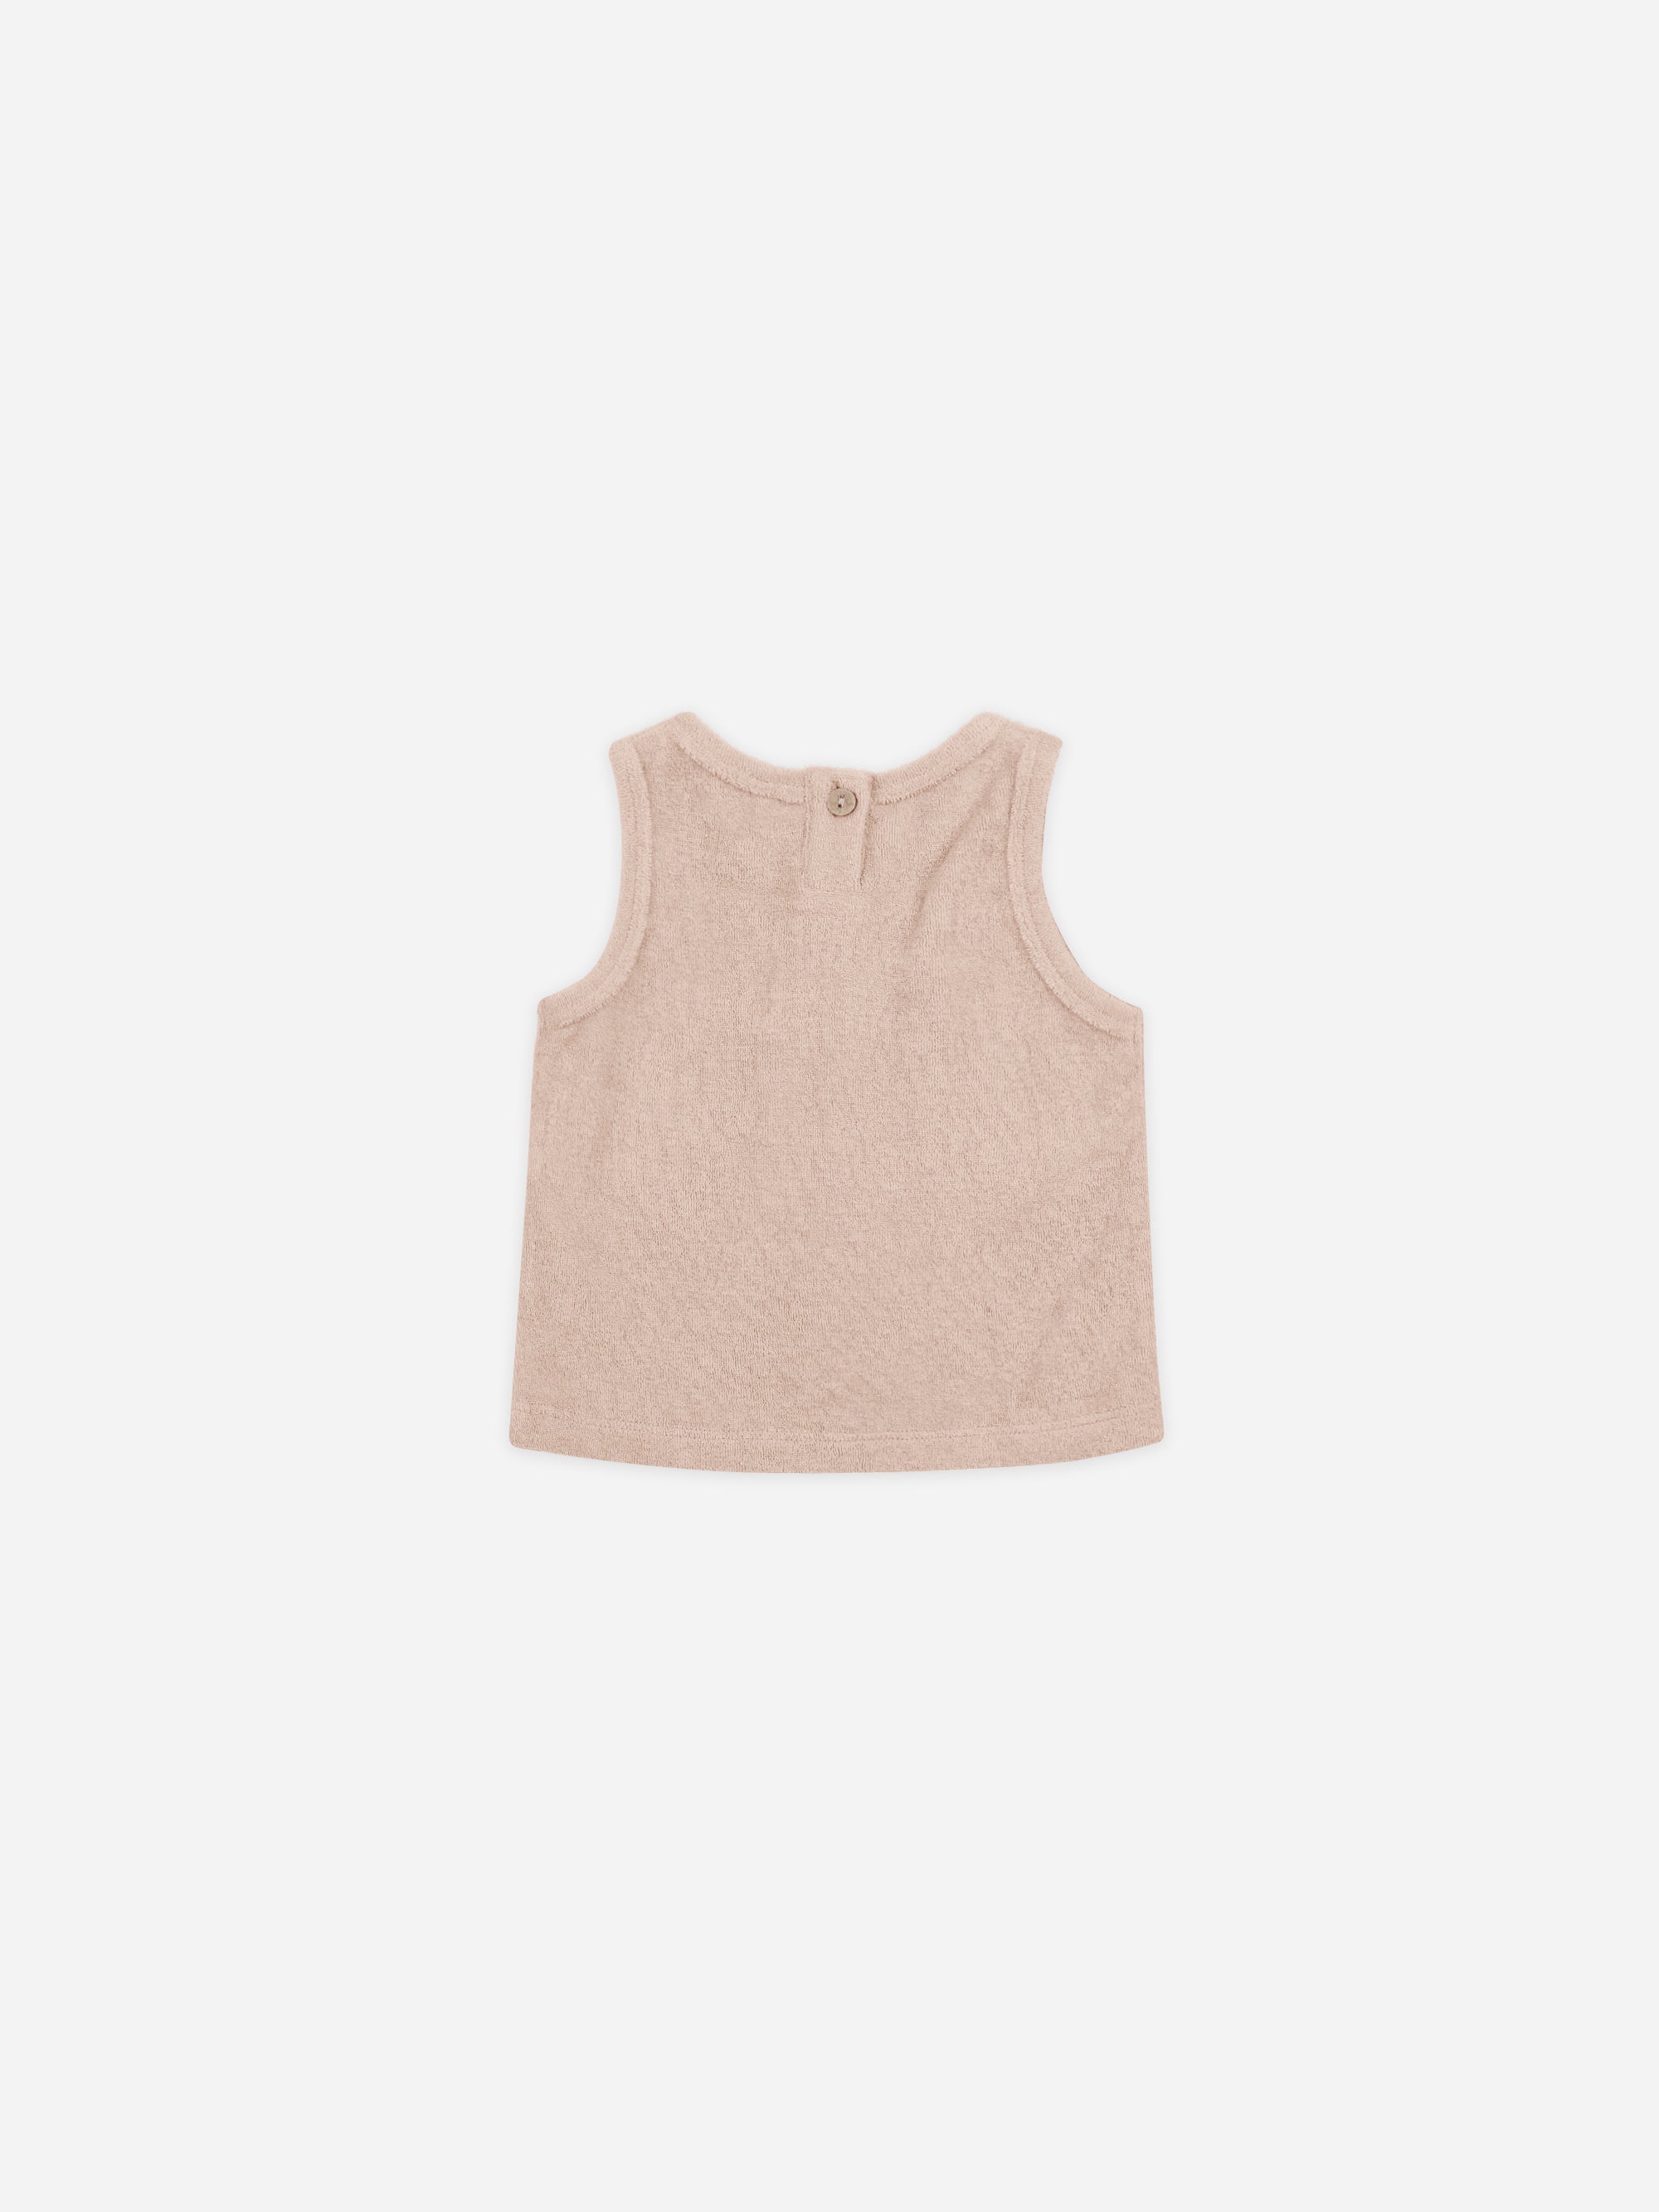 Terry Tank + Short Set || Blush - Rylee + Cru | Kids Clothes | Trendy Baby Clothes | Modern Infant Outfits |